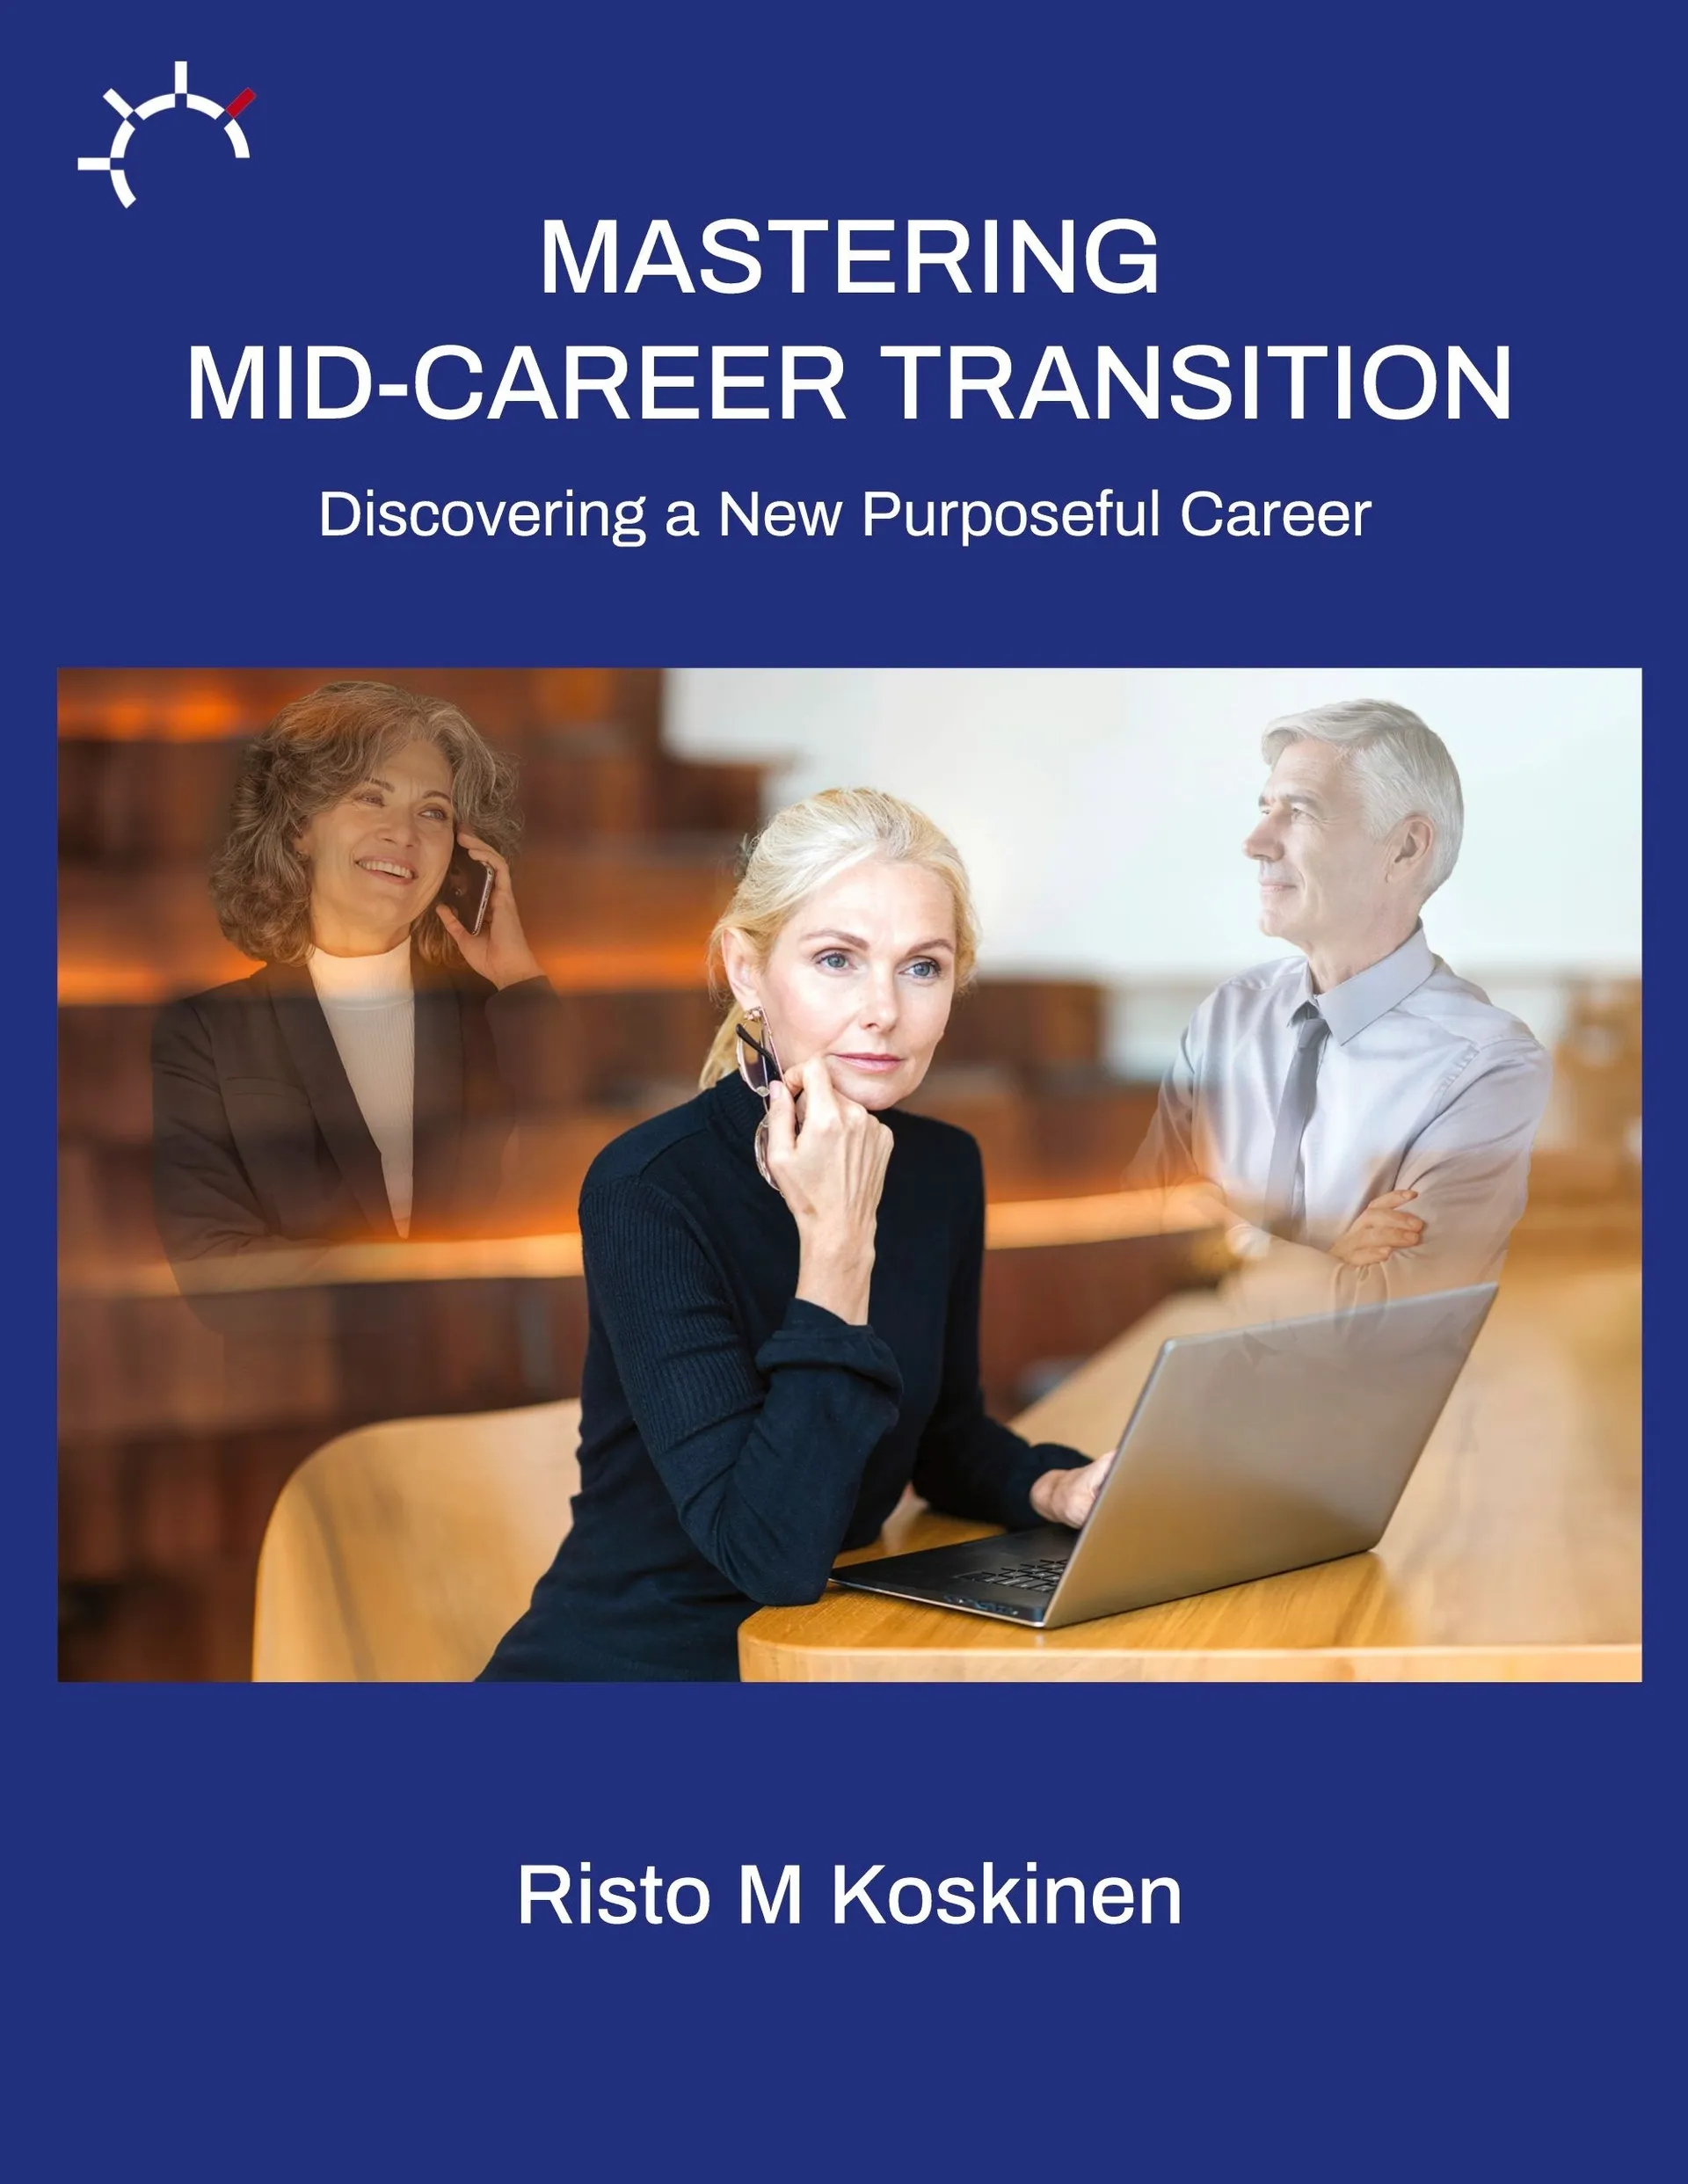 Koskinen, Mastering mid-career transition - Discovering a New Purposeful Career